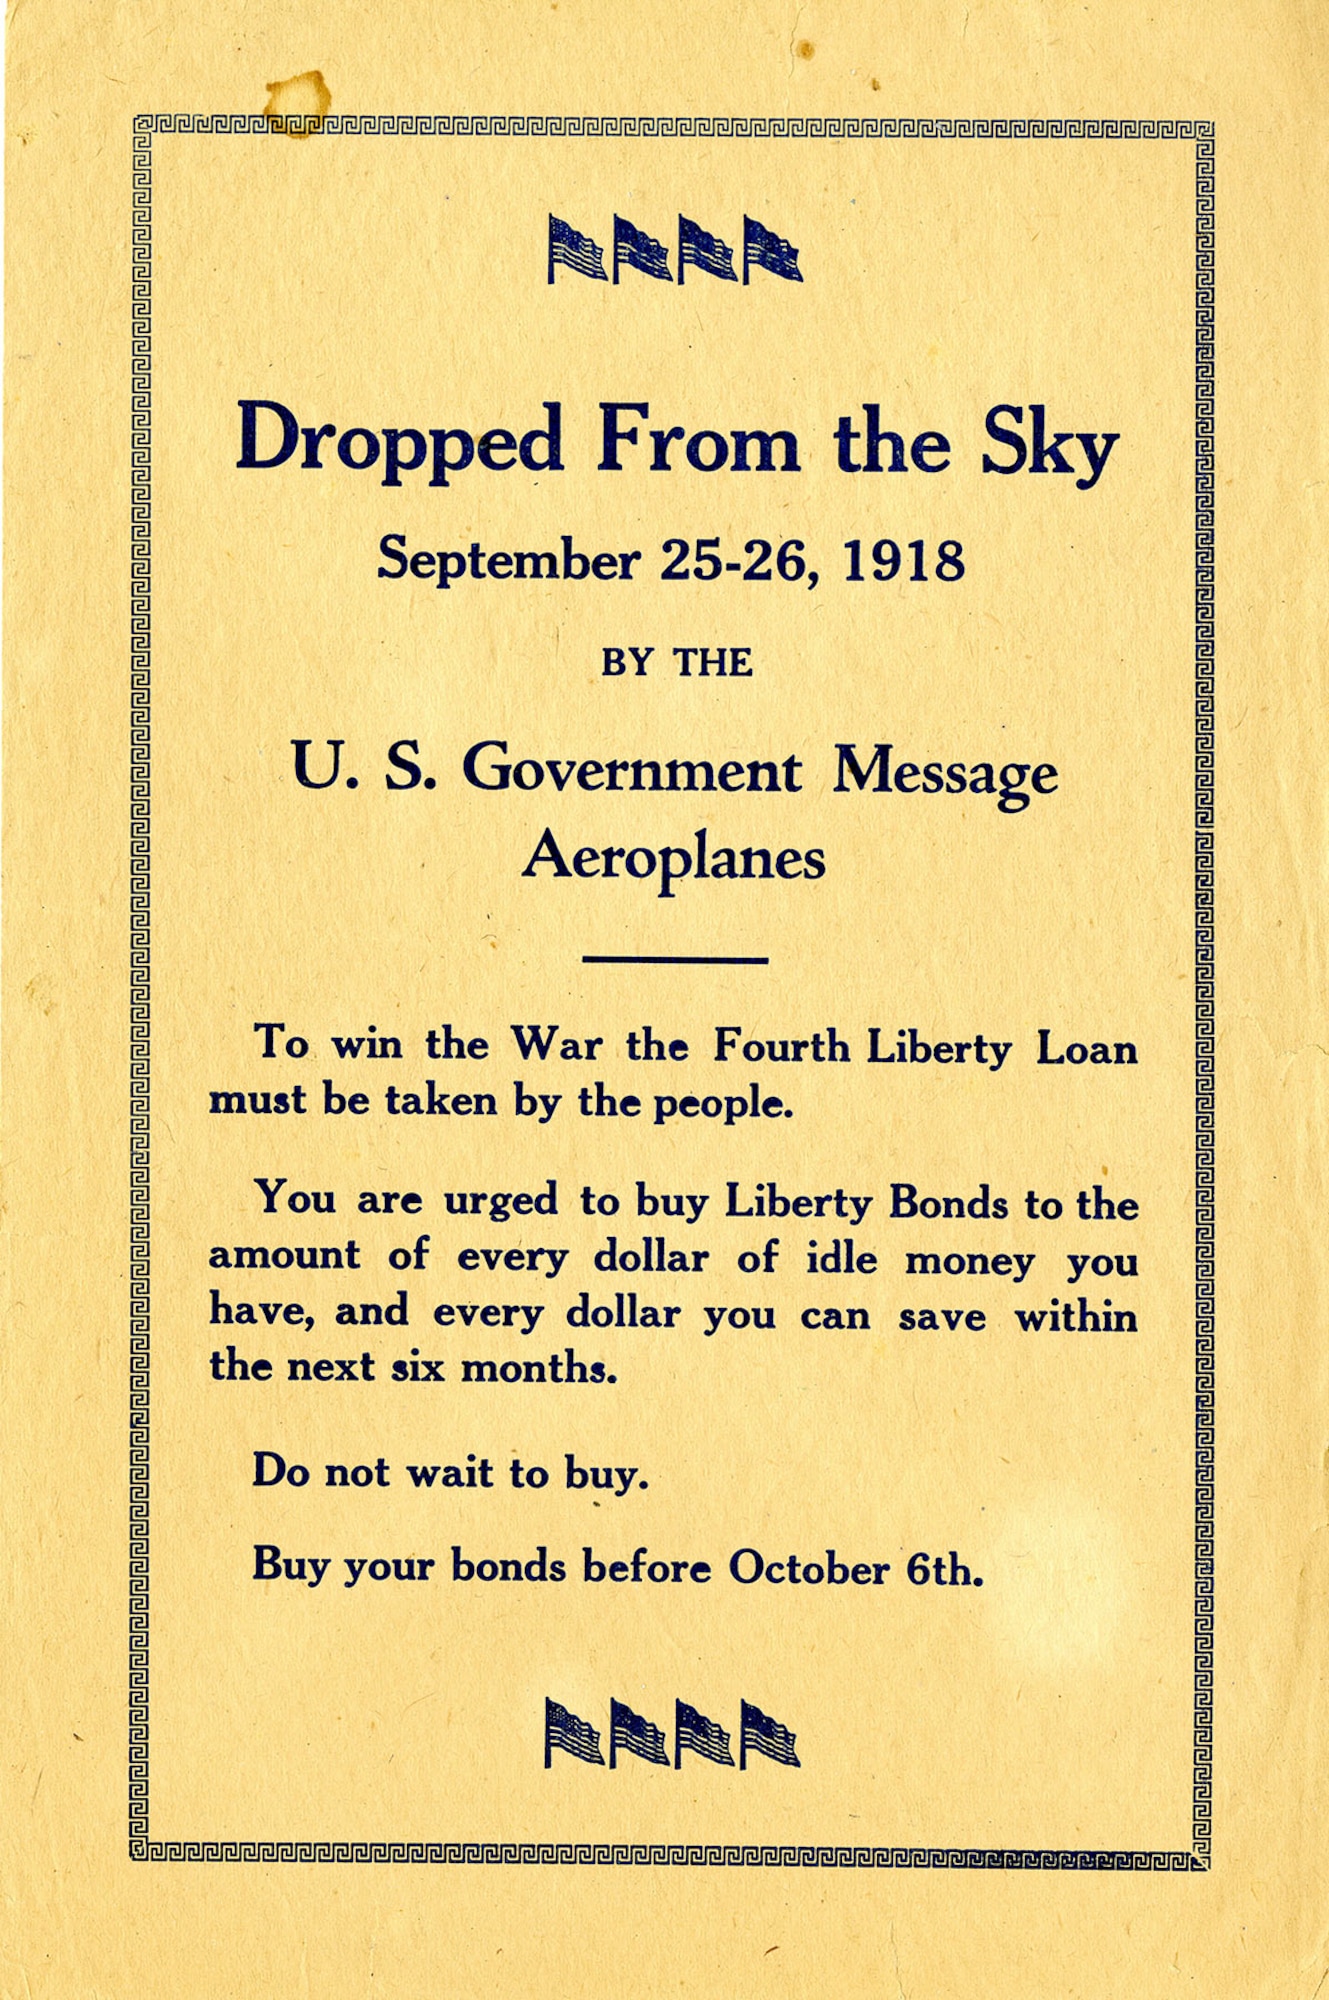 During World War I, the United States Treasury issued Liberty Bonds and War Saving Stamps to citizens who were eager to support the war effort. In order to promote the sale of these bonds and stamps, the Treasury Department created the War Savings Organization. This organization used many methods to spread the word about Liberty Bonds and War Saving Stamps. (U.S. Air Force photo)